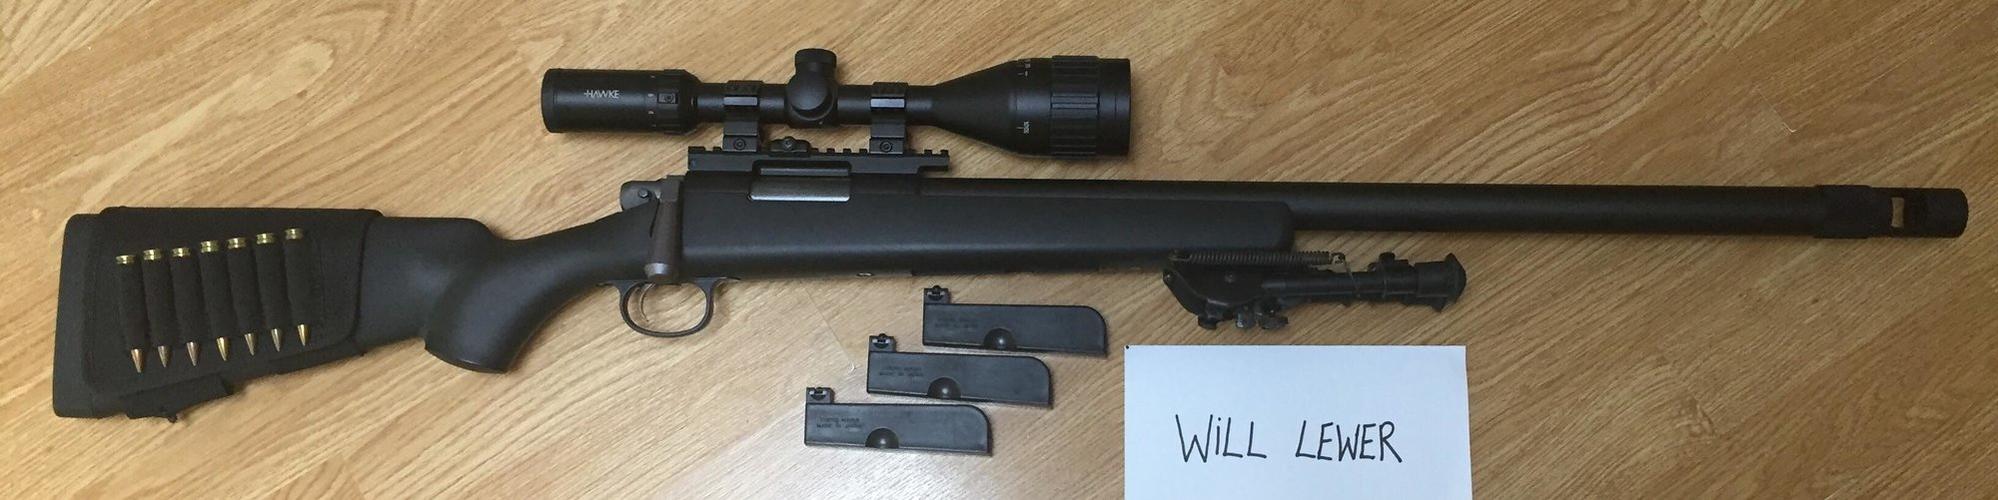 Upgraded Tokyo Marui VSR-10 Sniper Rifle with Extras